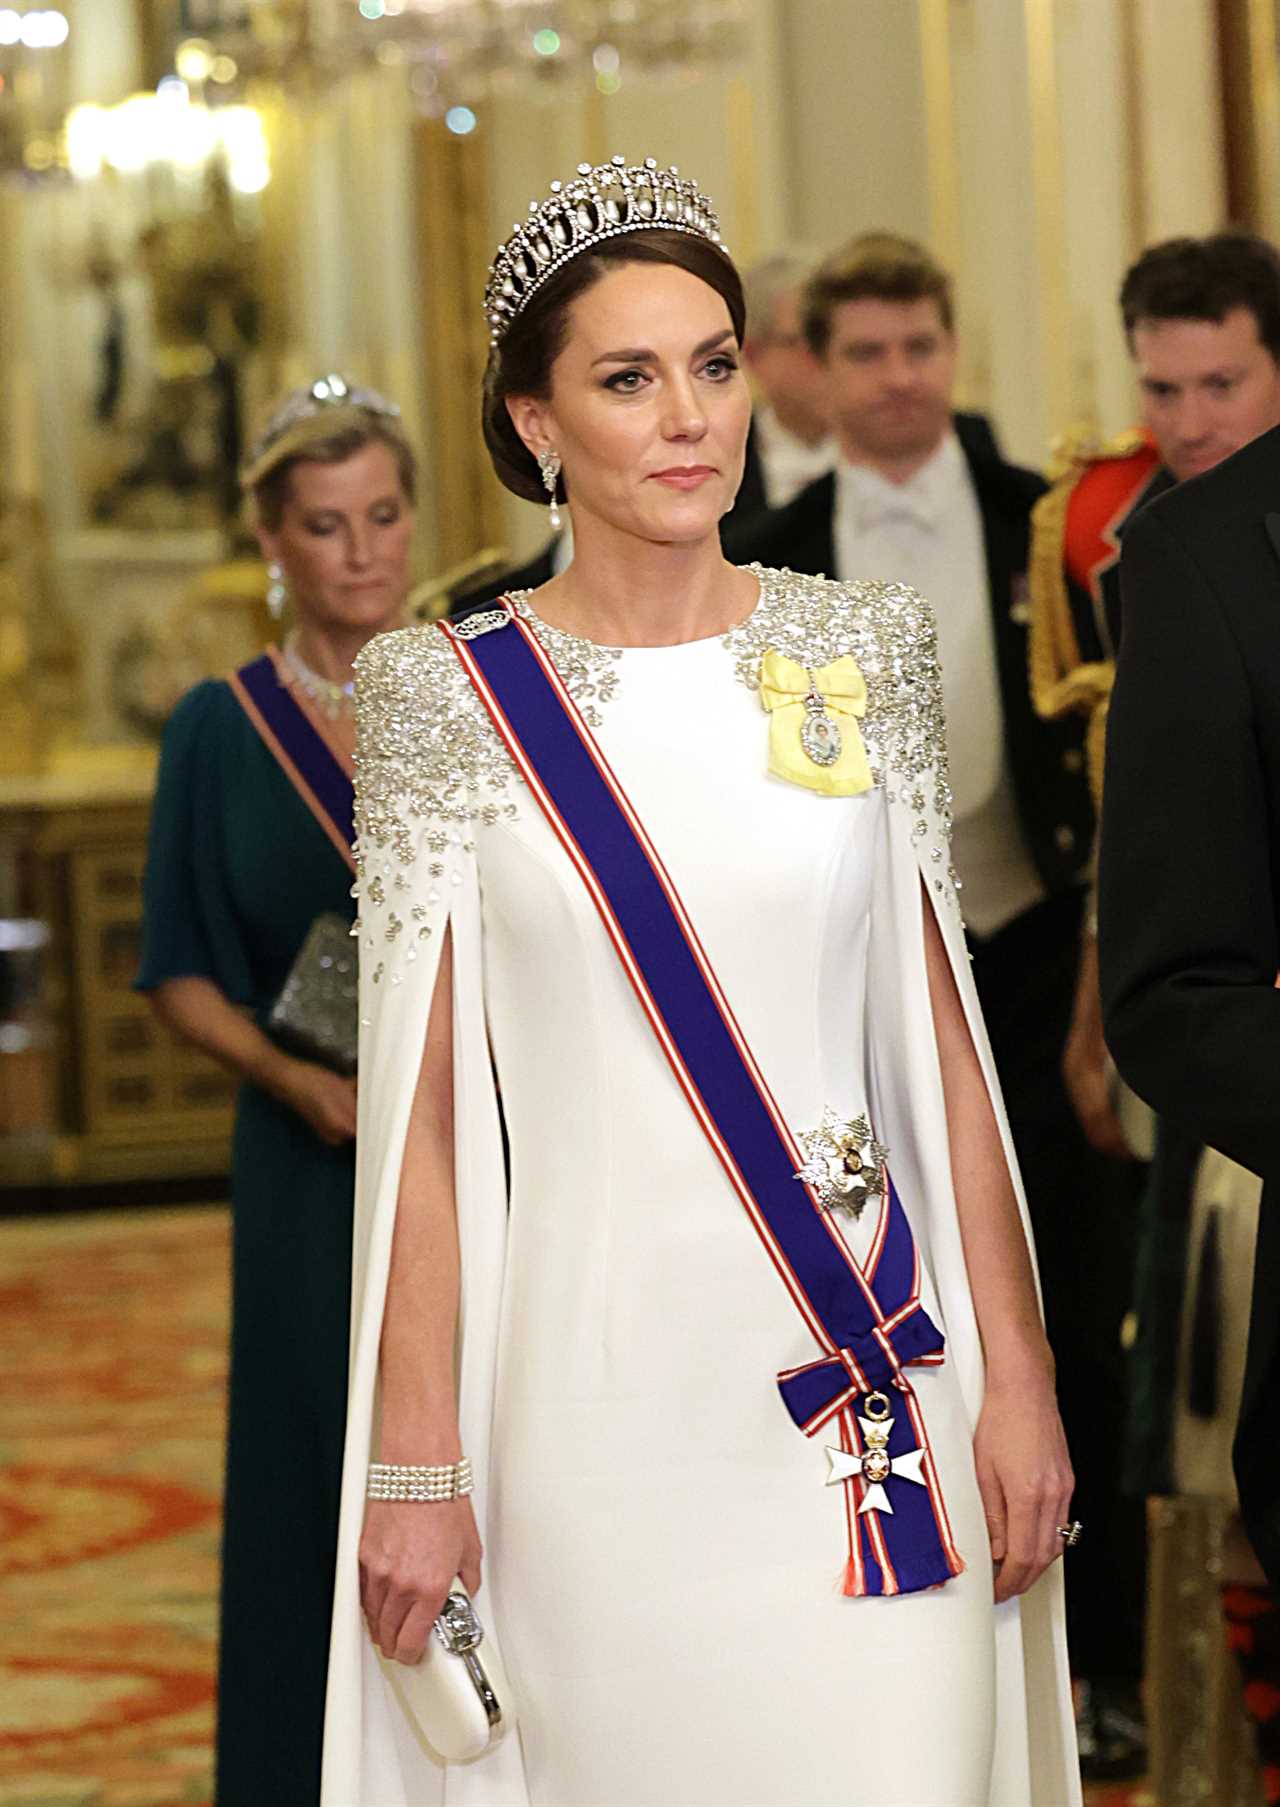 Kate Middleton pays touching tribute to Princess Diana as she stuns at state banquet with Prince William